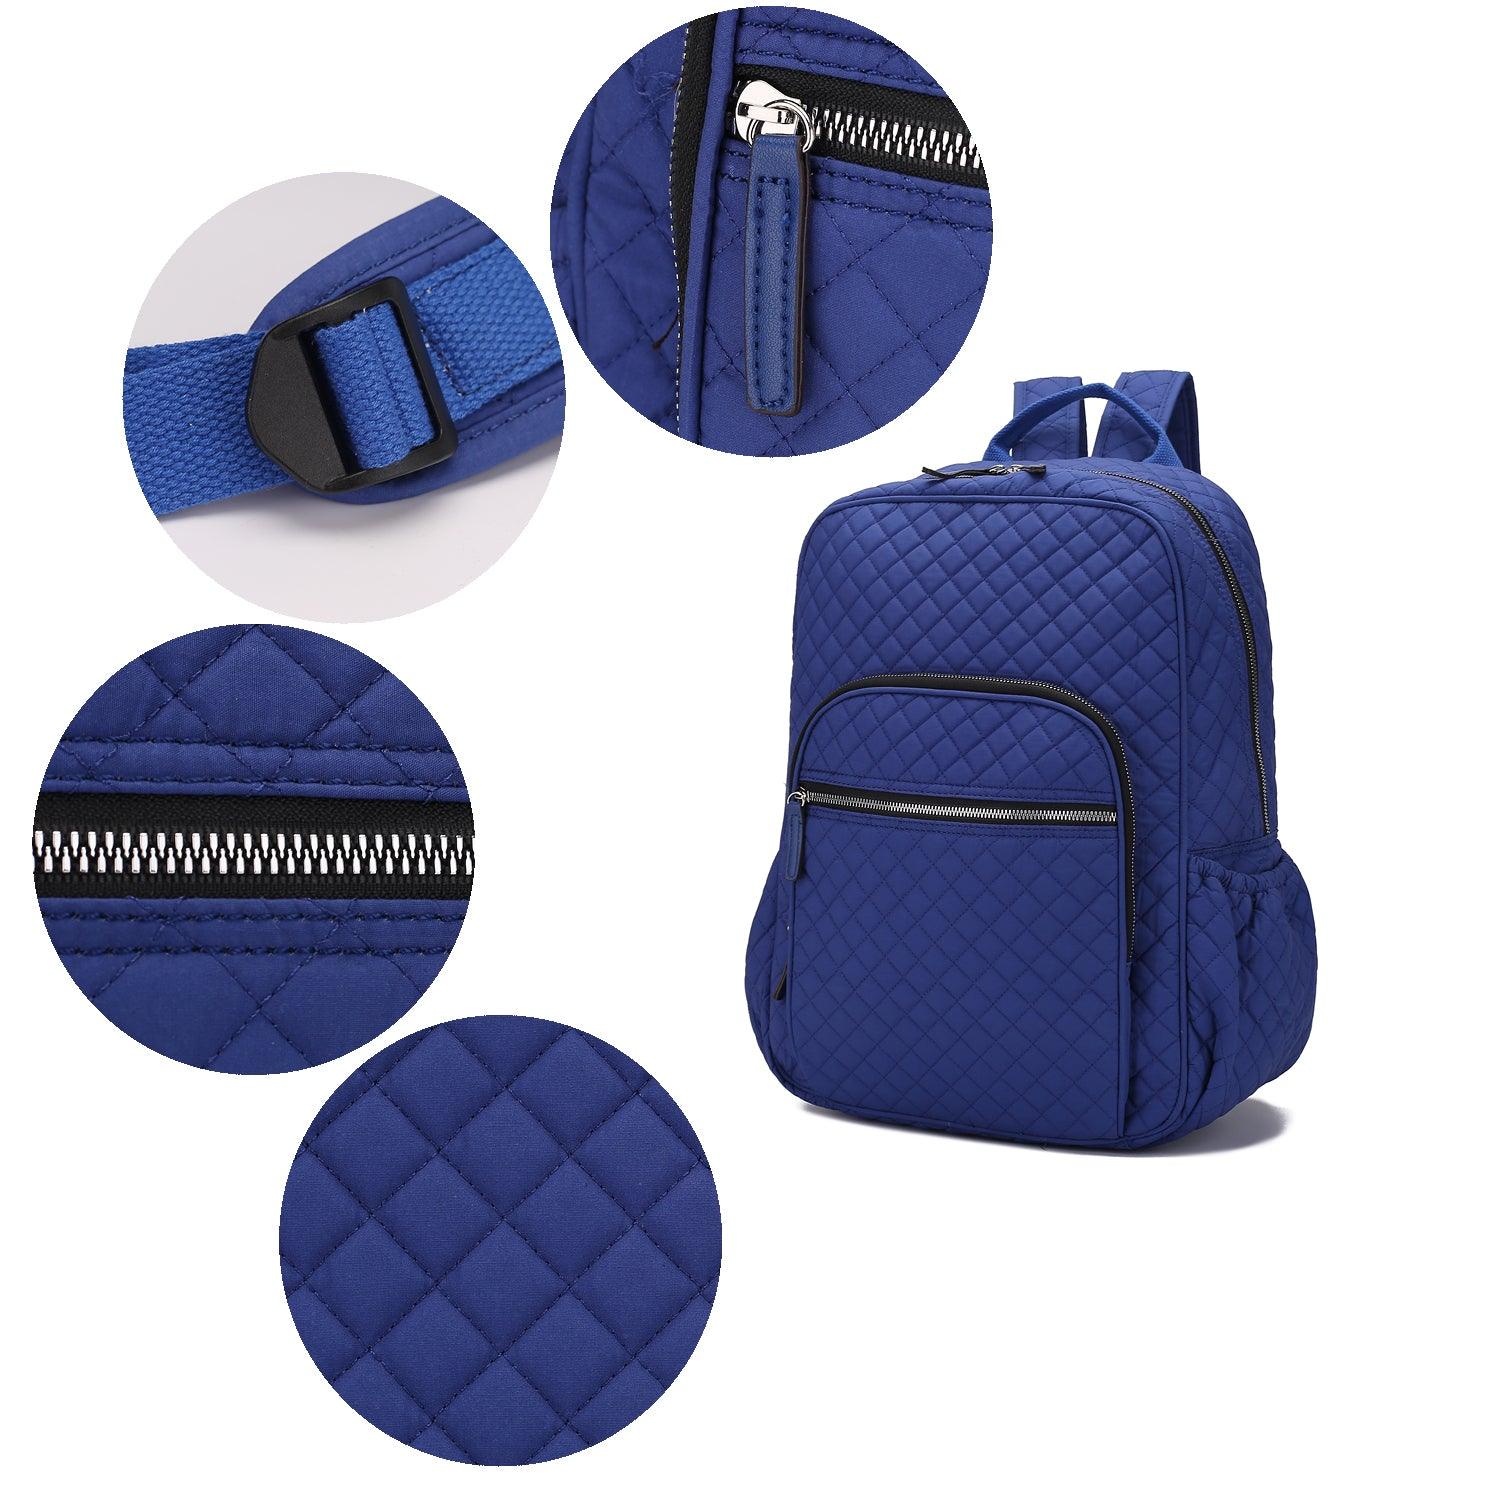 Wallets, Handbags & Accessories Mycelia Quilted Backpack